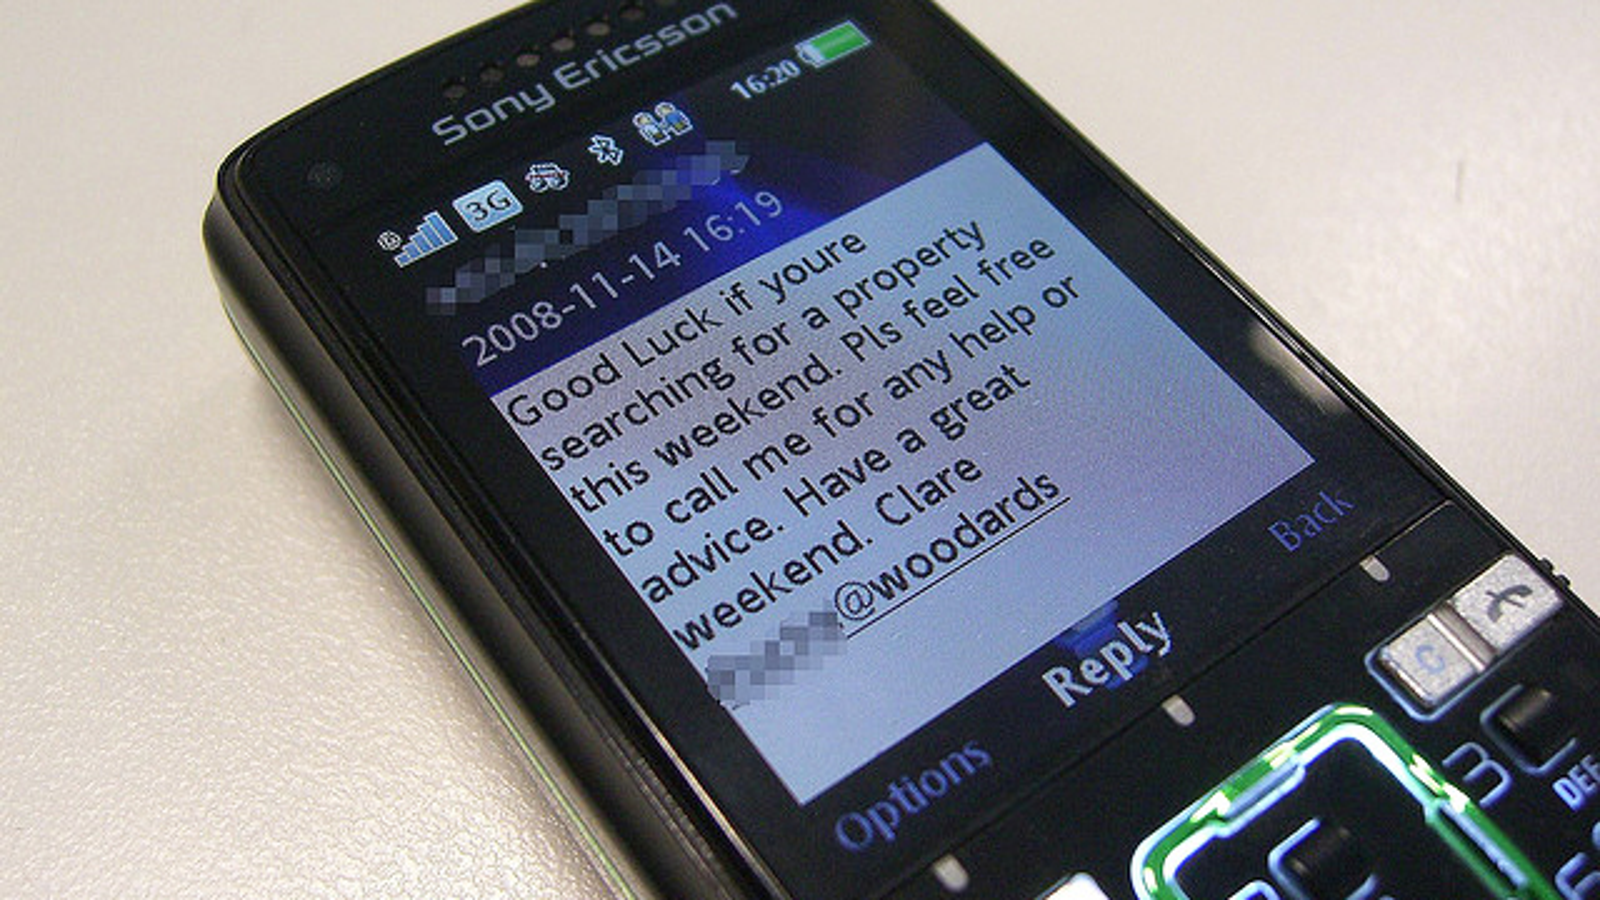 cat facts spam text messages